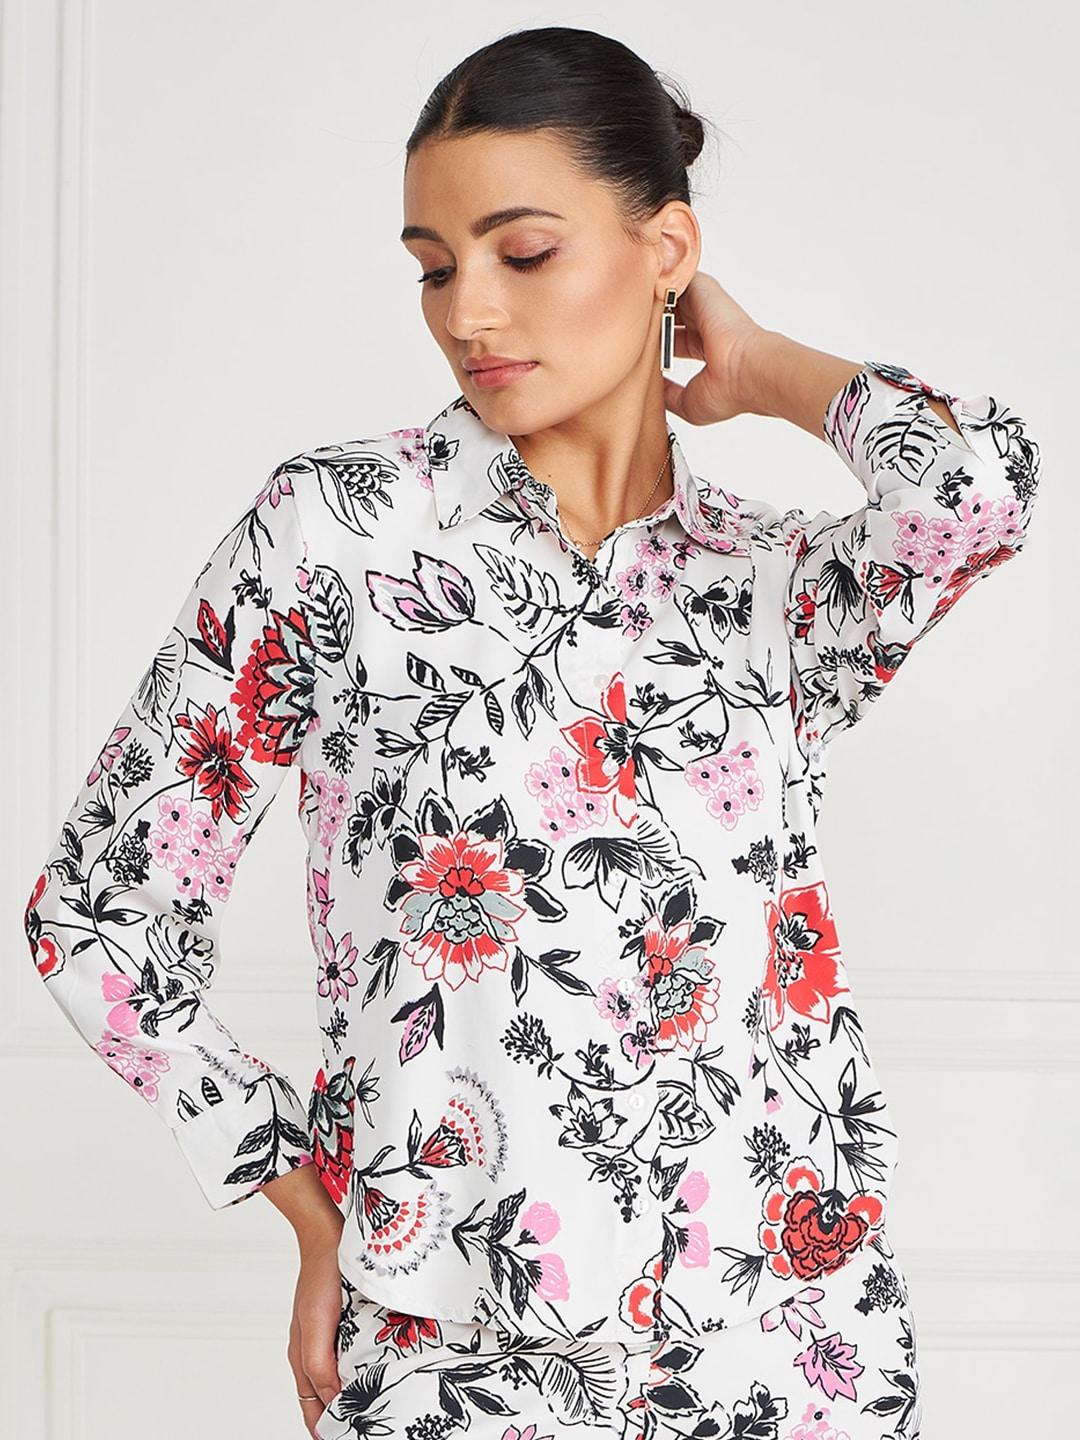 kassually-floral-printed-spread-collar-casual-shirt